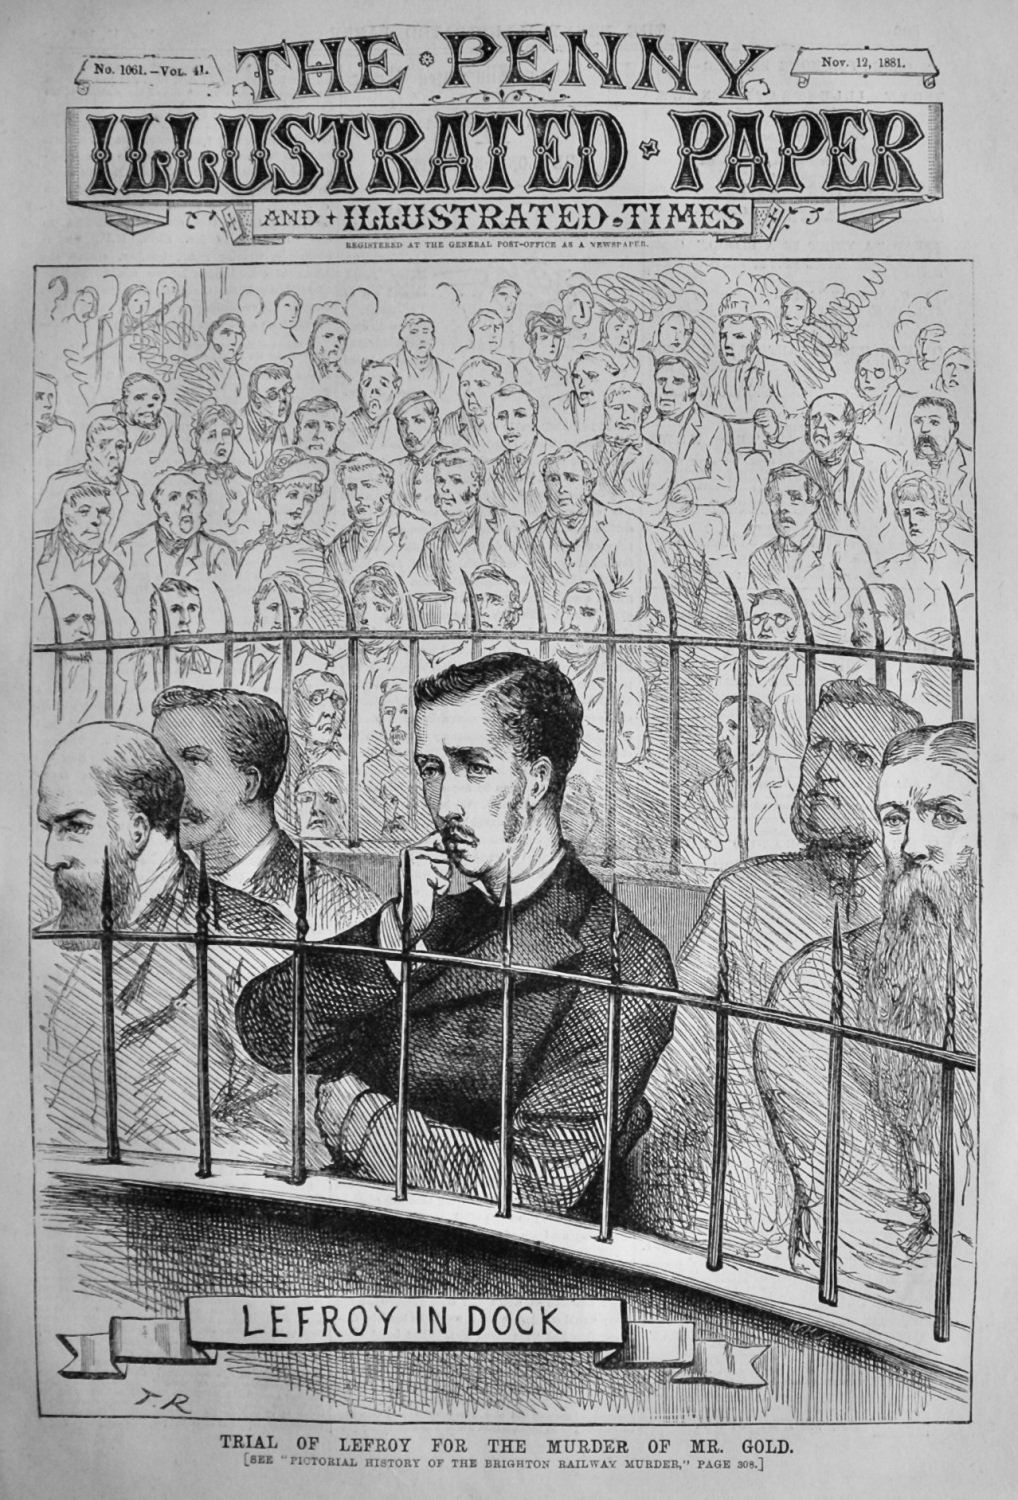 Trial of Lefroy for the Murder of Mr. Gold.  1881.